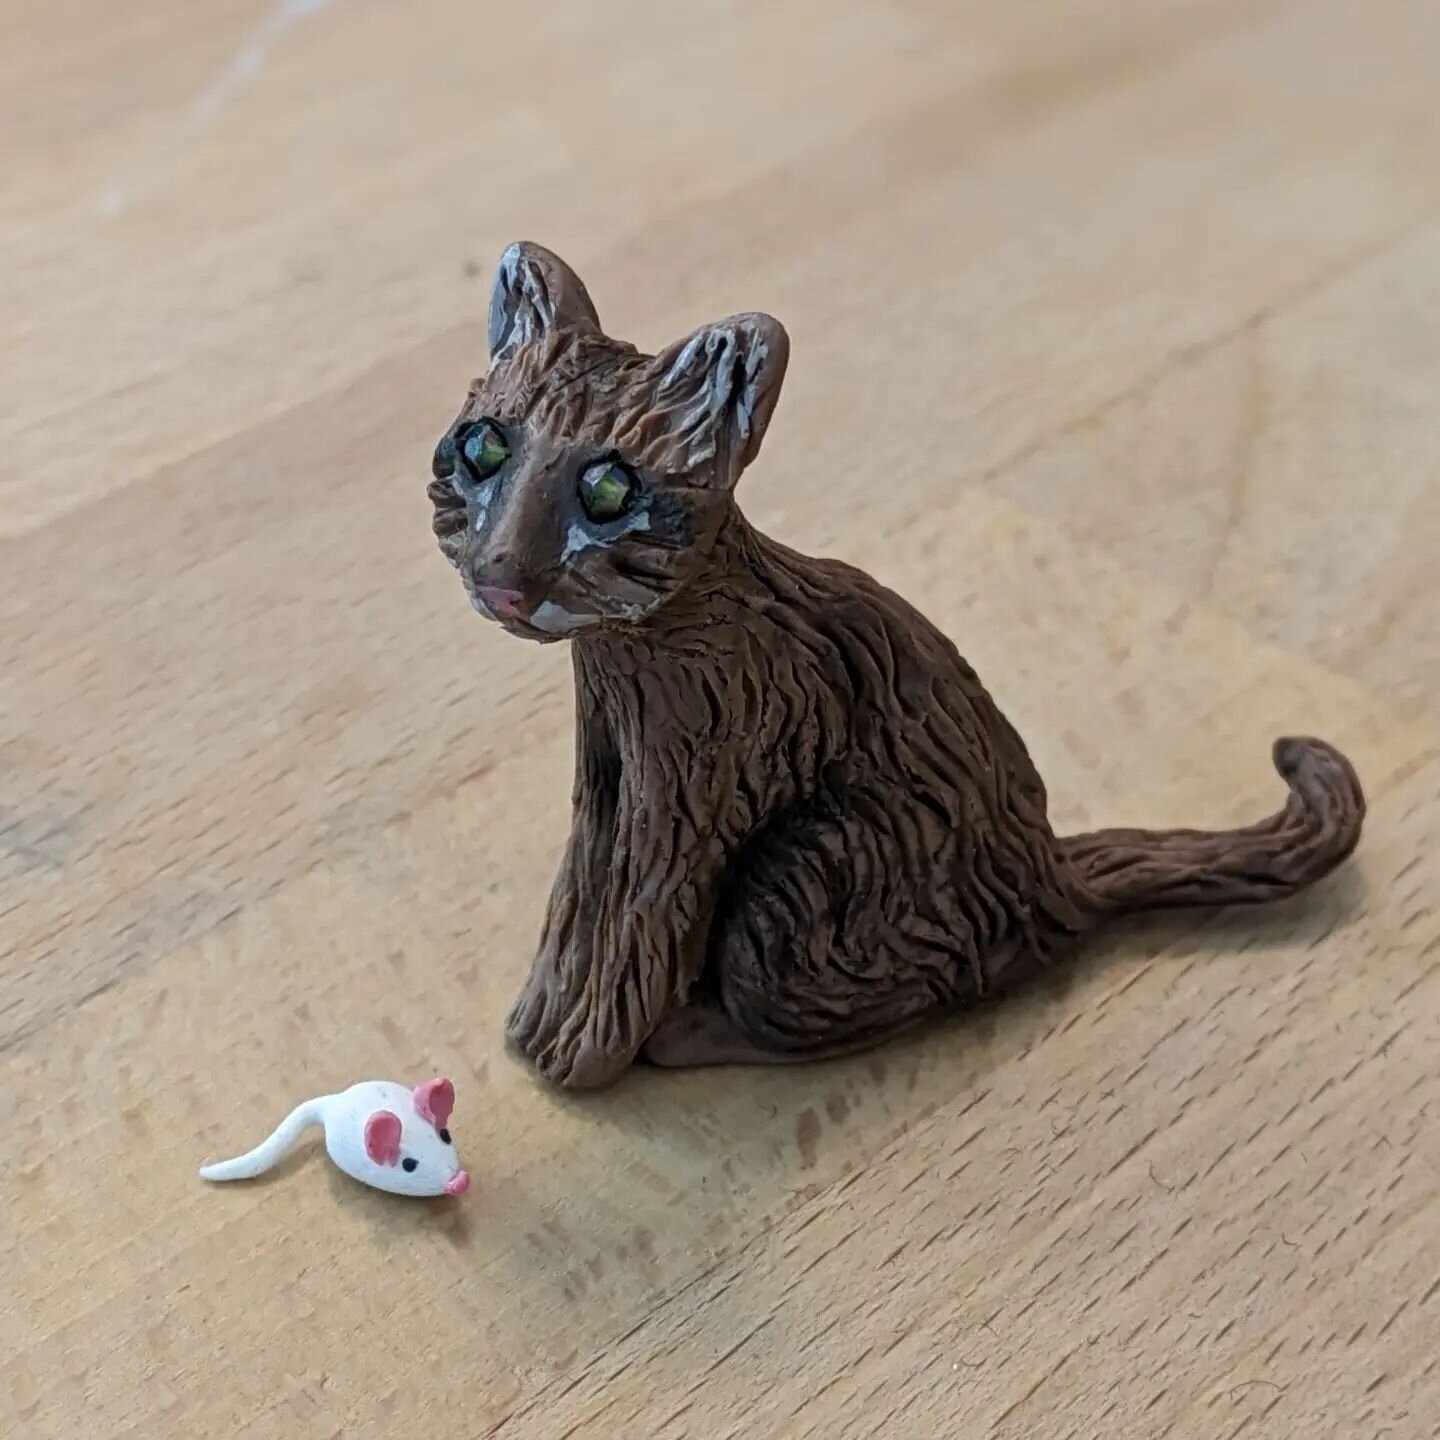 Cat sculpted by me, mouse sculpted by @miss.mantis